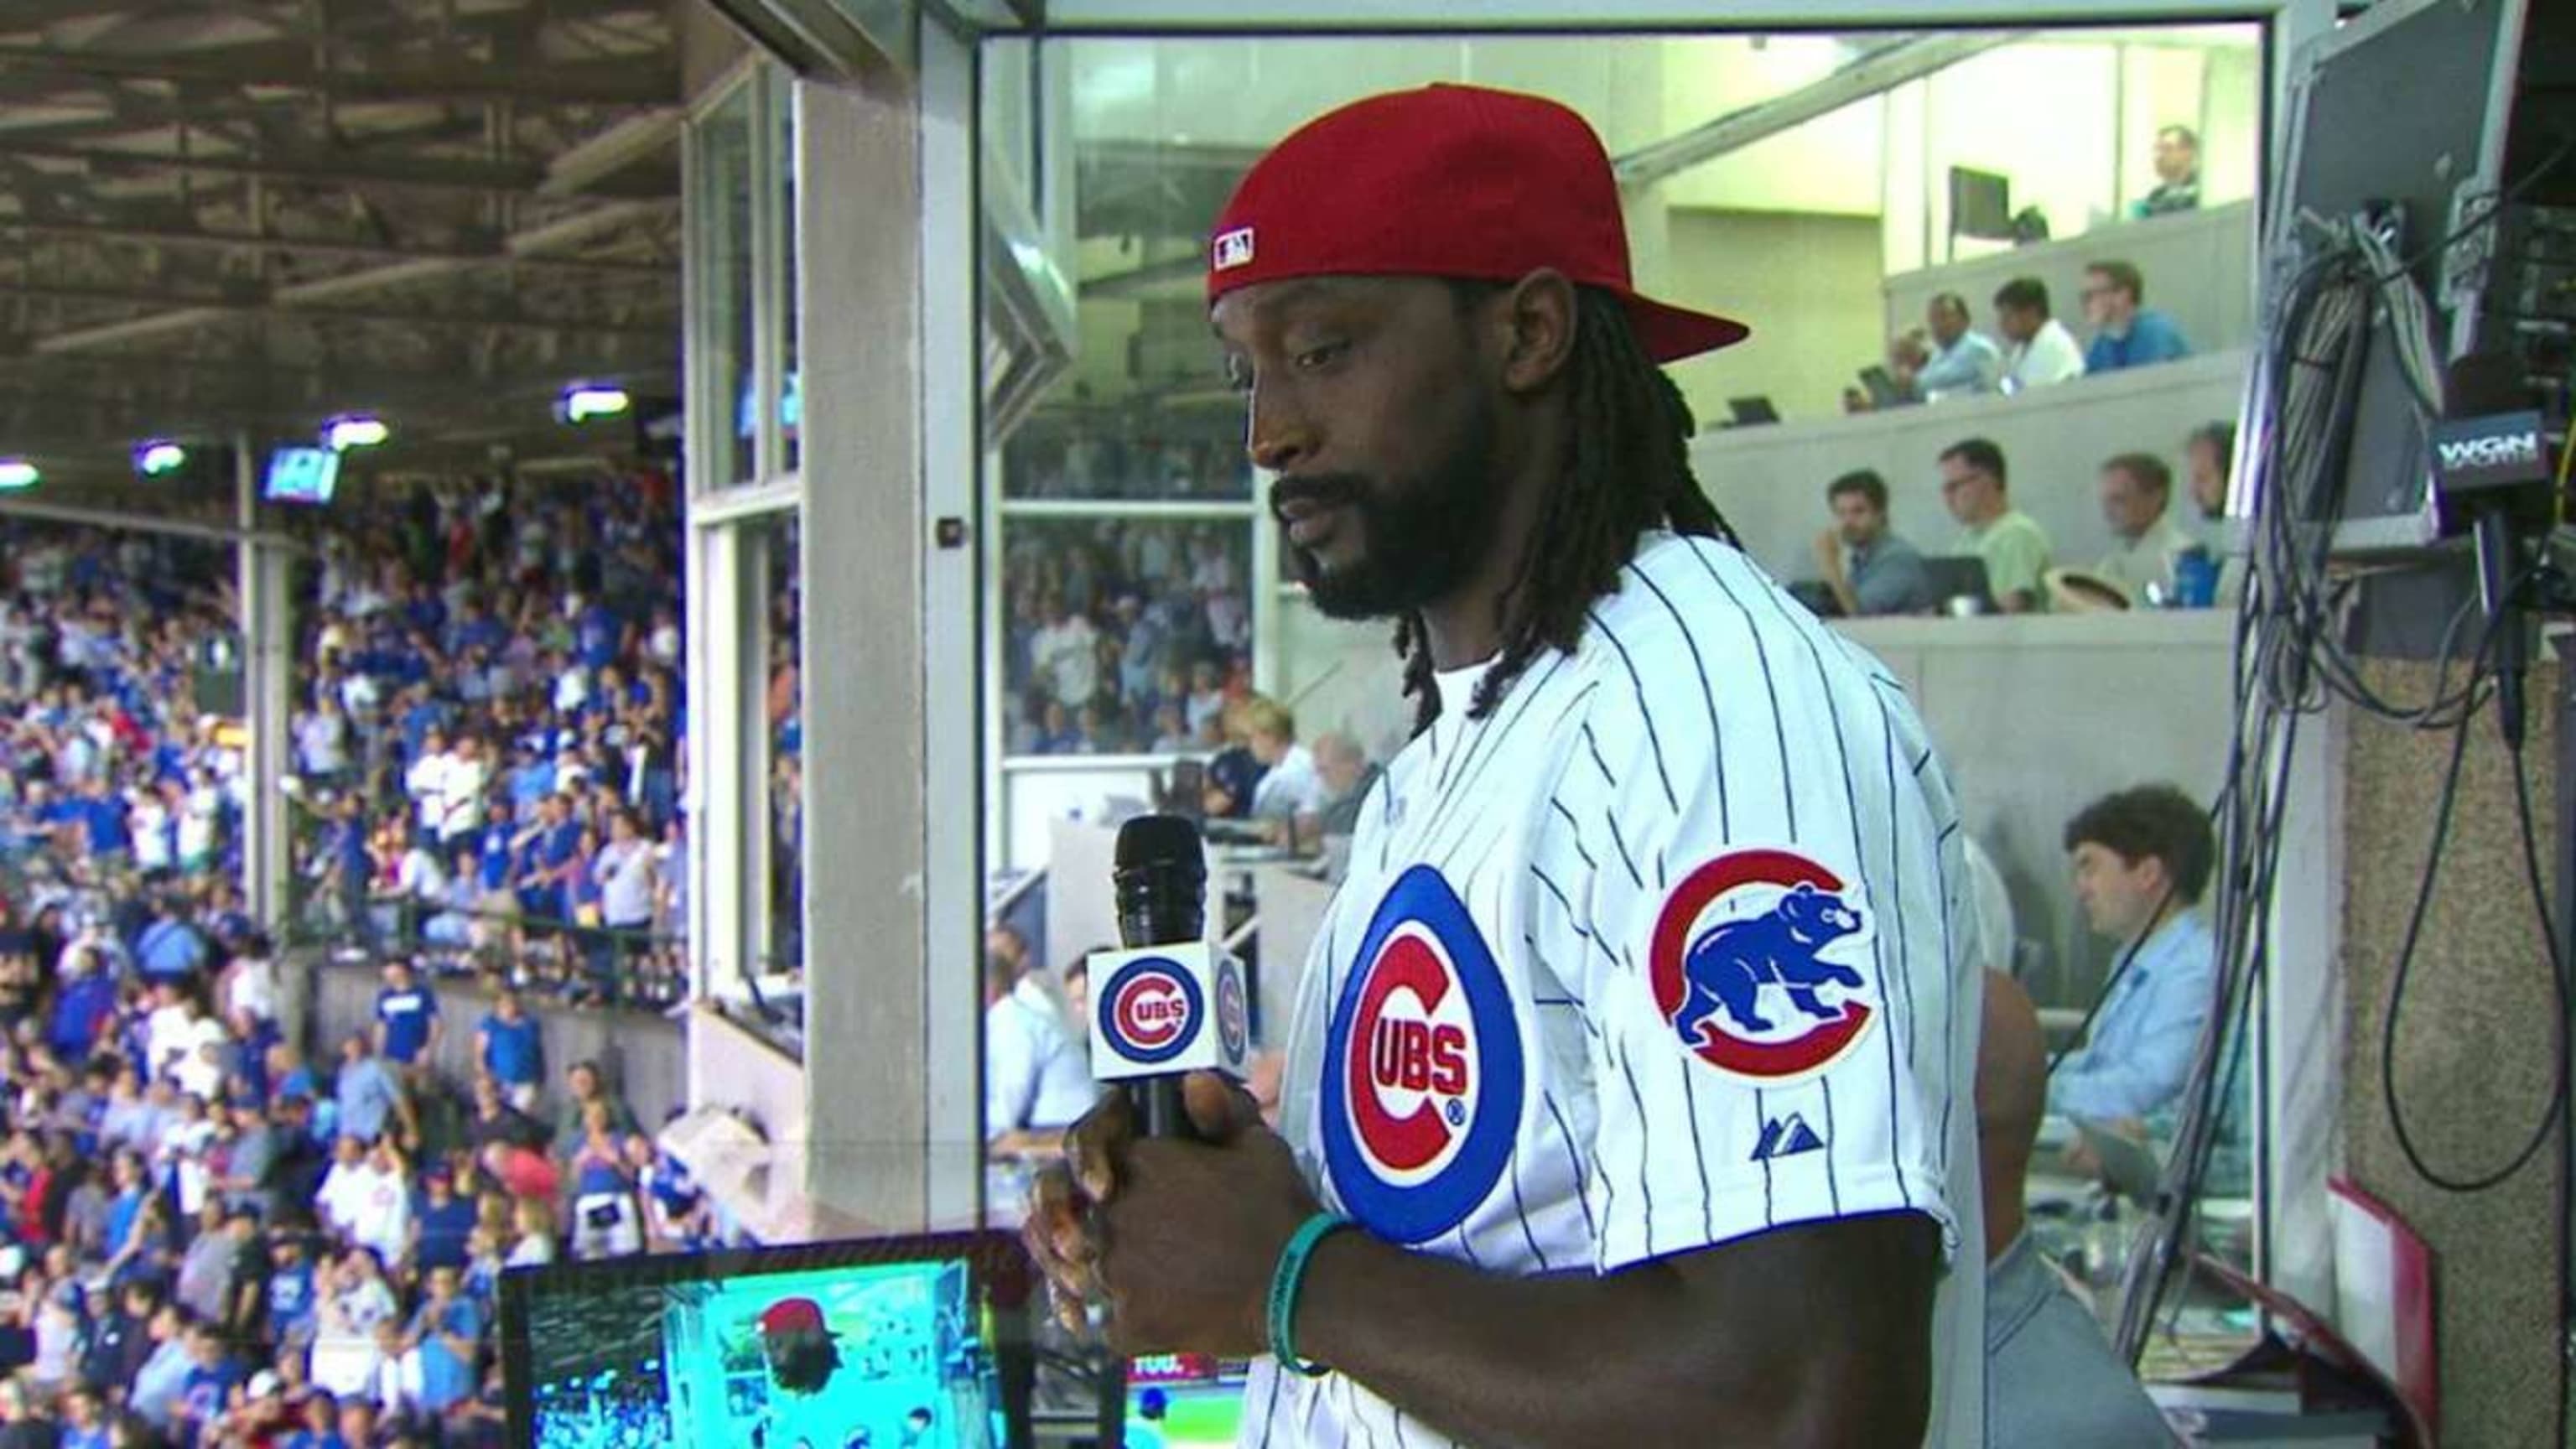 Listen to Charles Peanut Tillman pour his heart into Take Me Out to the Ball Game at Wrigley MLB